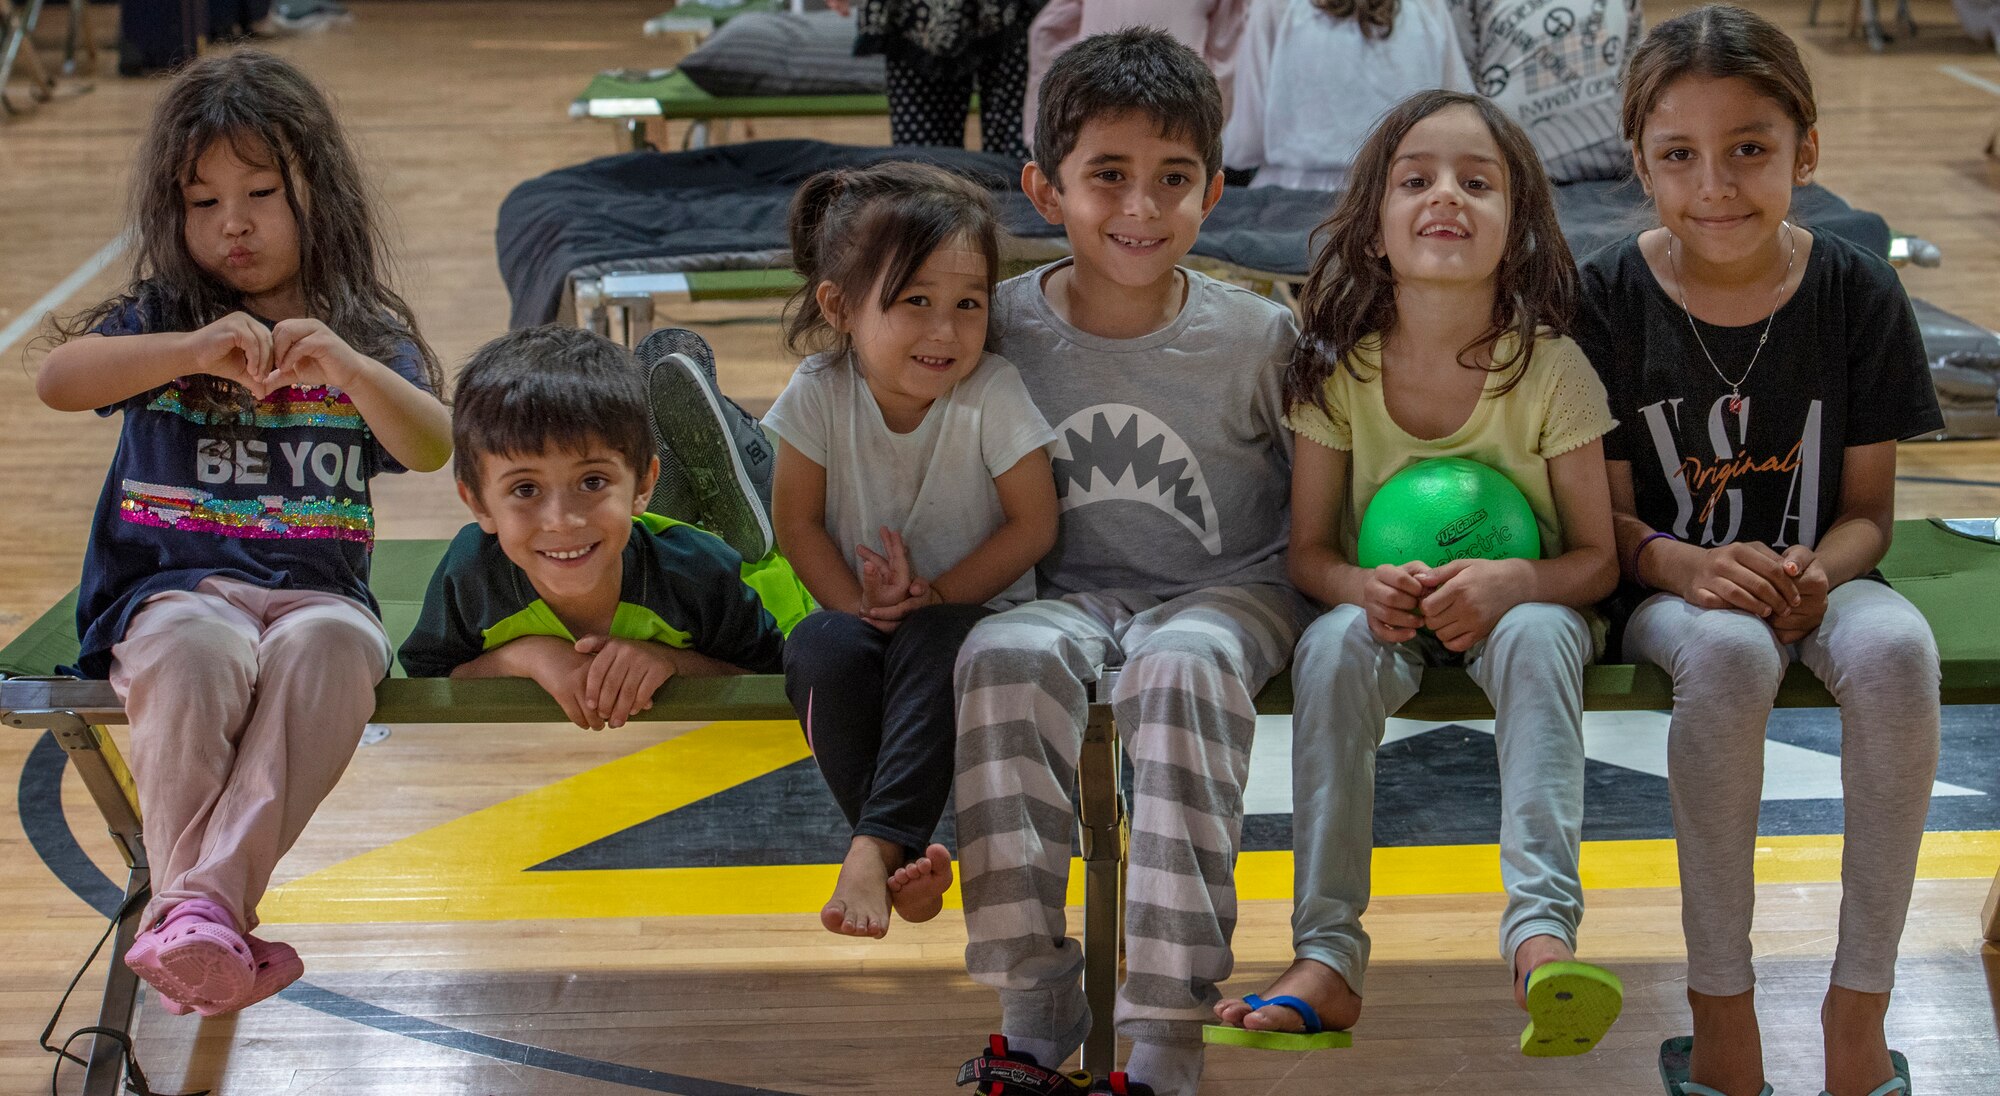 Children pose for a picture in a gym in the CENTCOM region, Aug. 20, 2021.